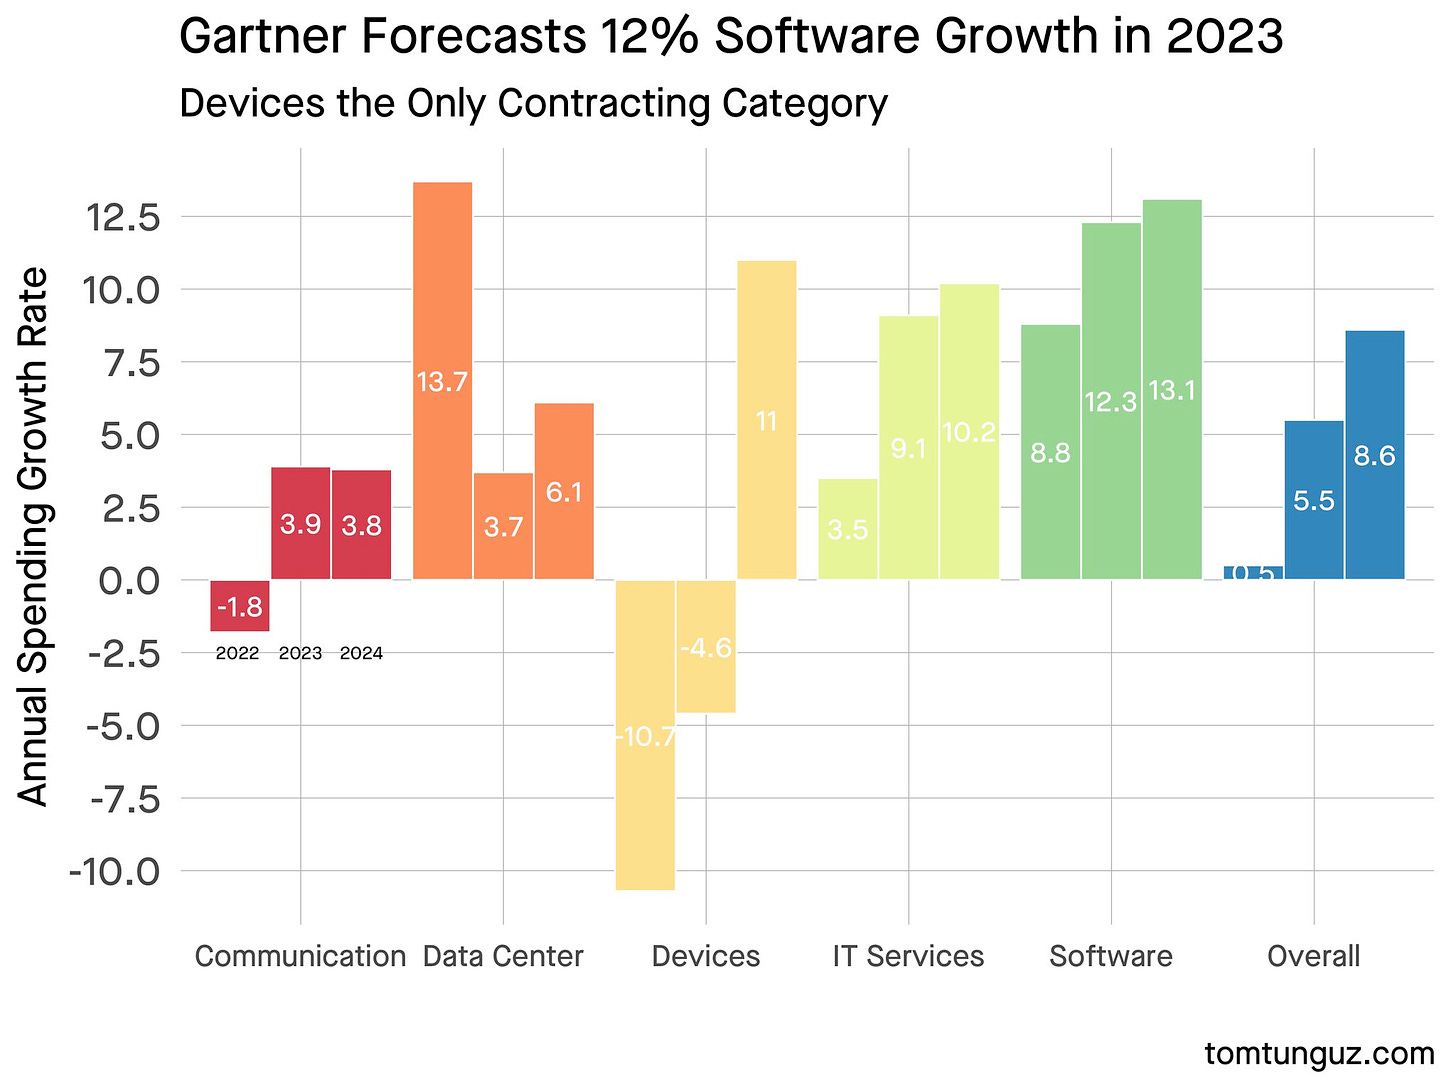 Gartner forecasts 12% software growth in 2023